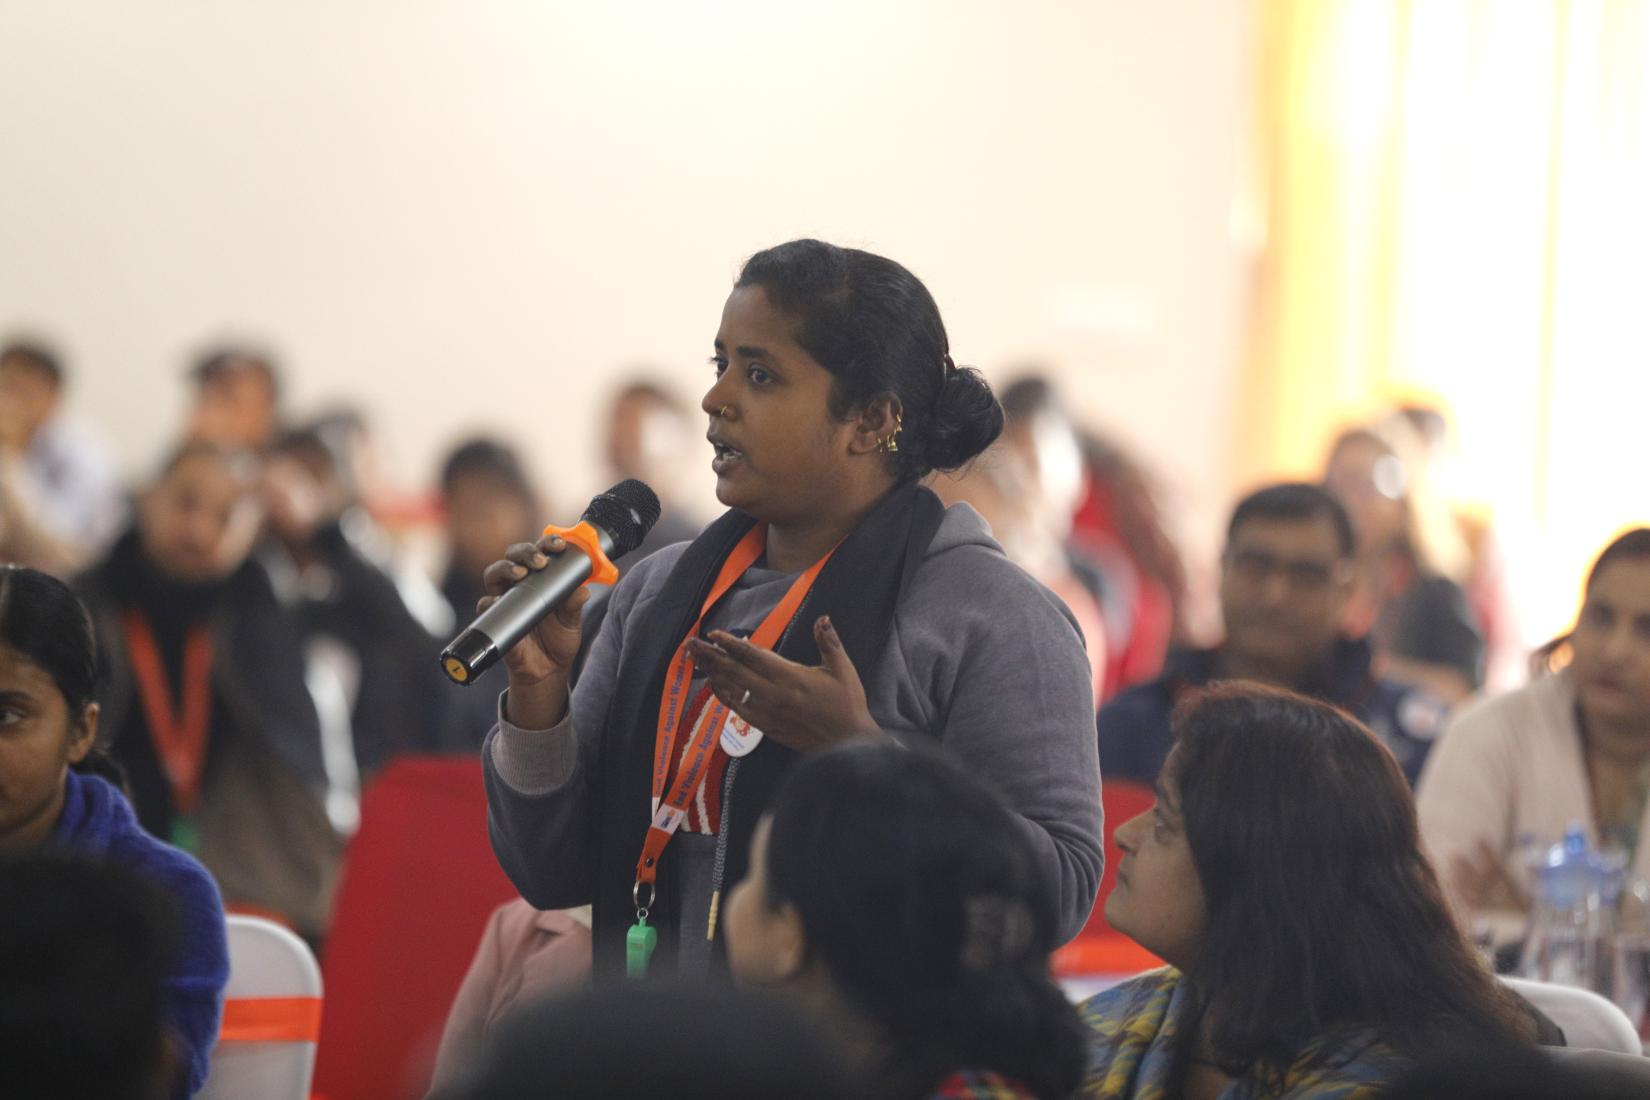 A young girl holds a microphone and speaks while being surrounded by a group of young individuals seated on chairs, attentively listening to her.